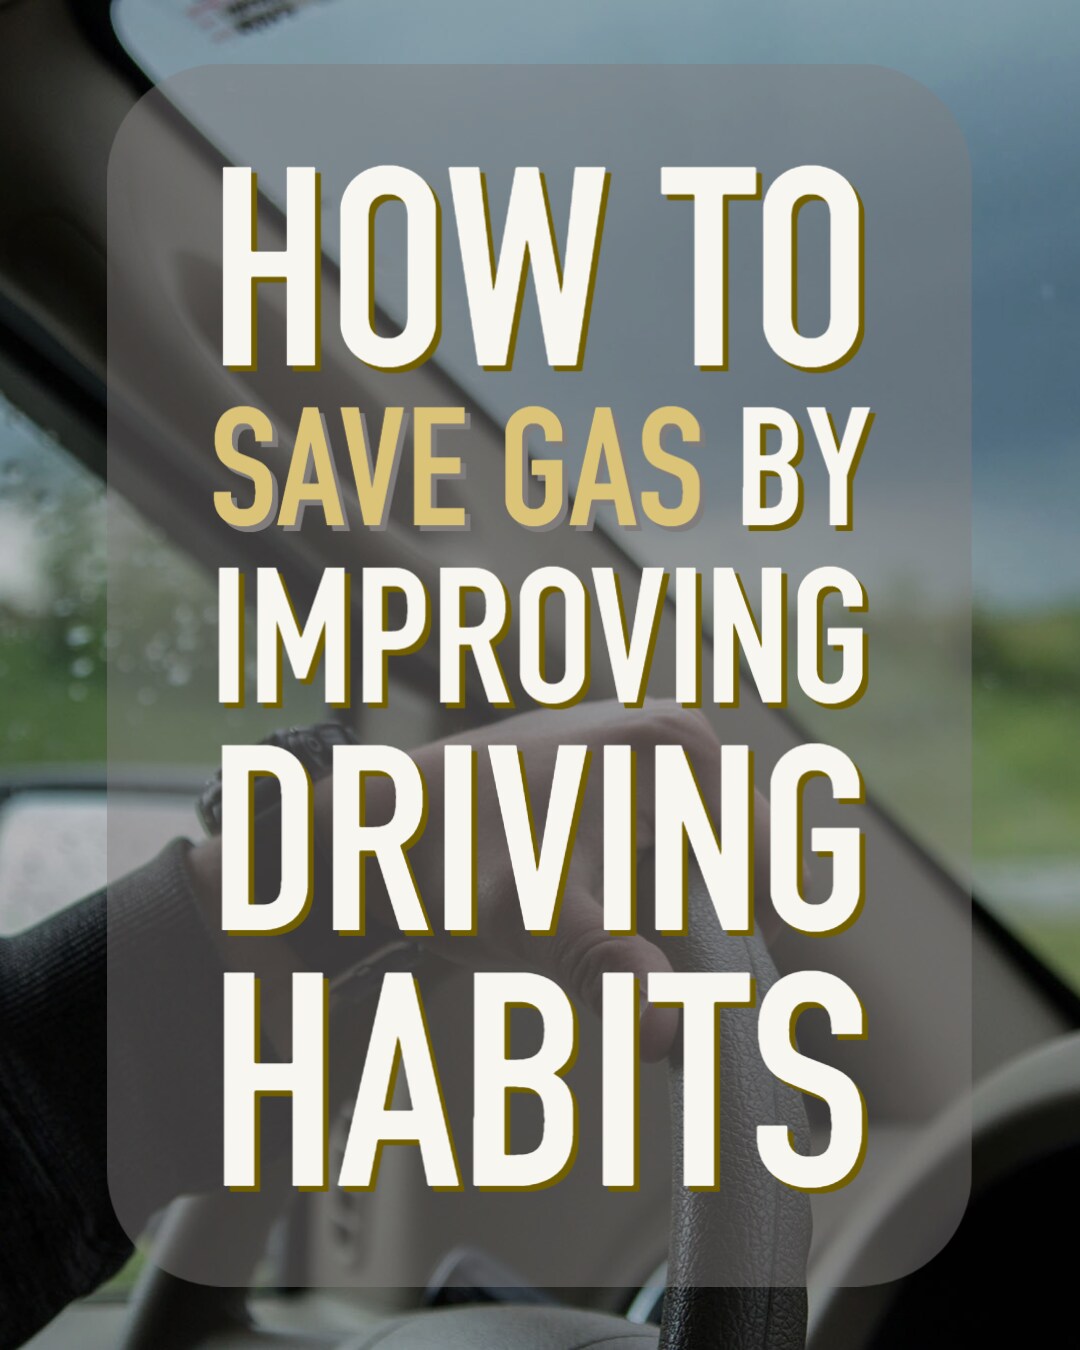 "How to save gas by improving driving habits"